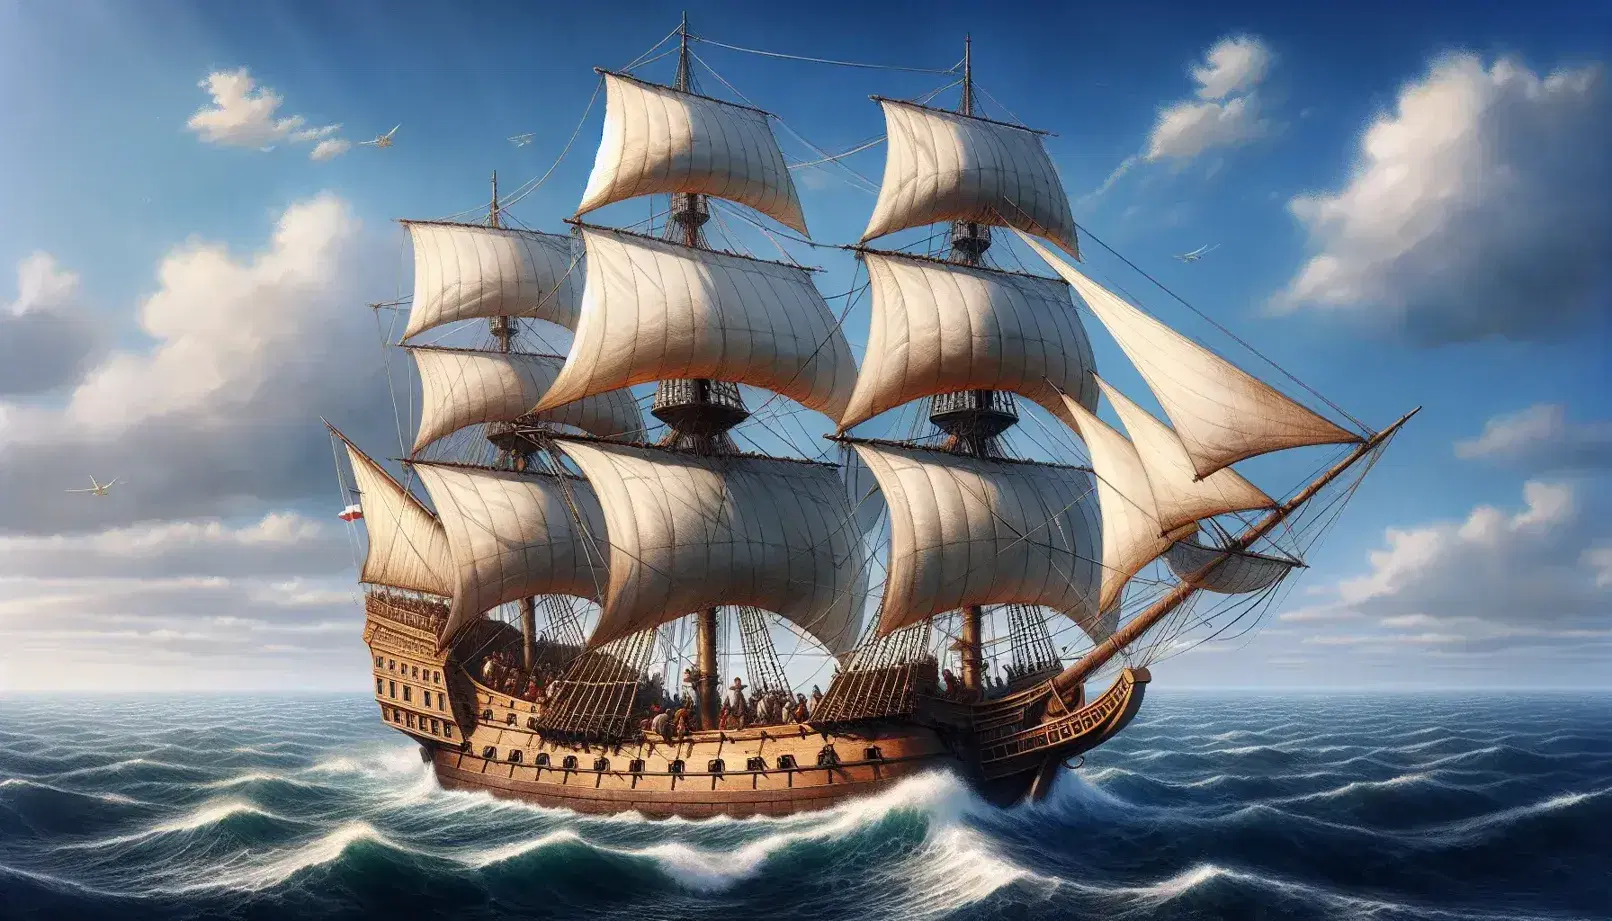 Three-masted Age of Discovery sailing ship at sea with billowed white sails, wooden deck with barrels, and busy sailors under a clear blue sky.